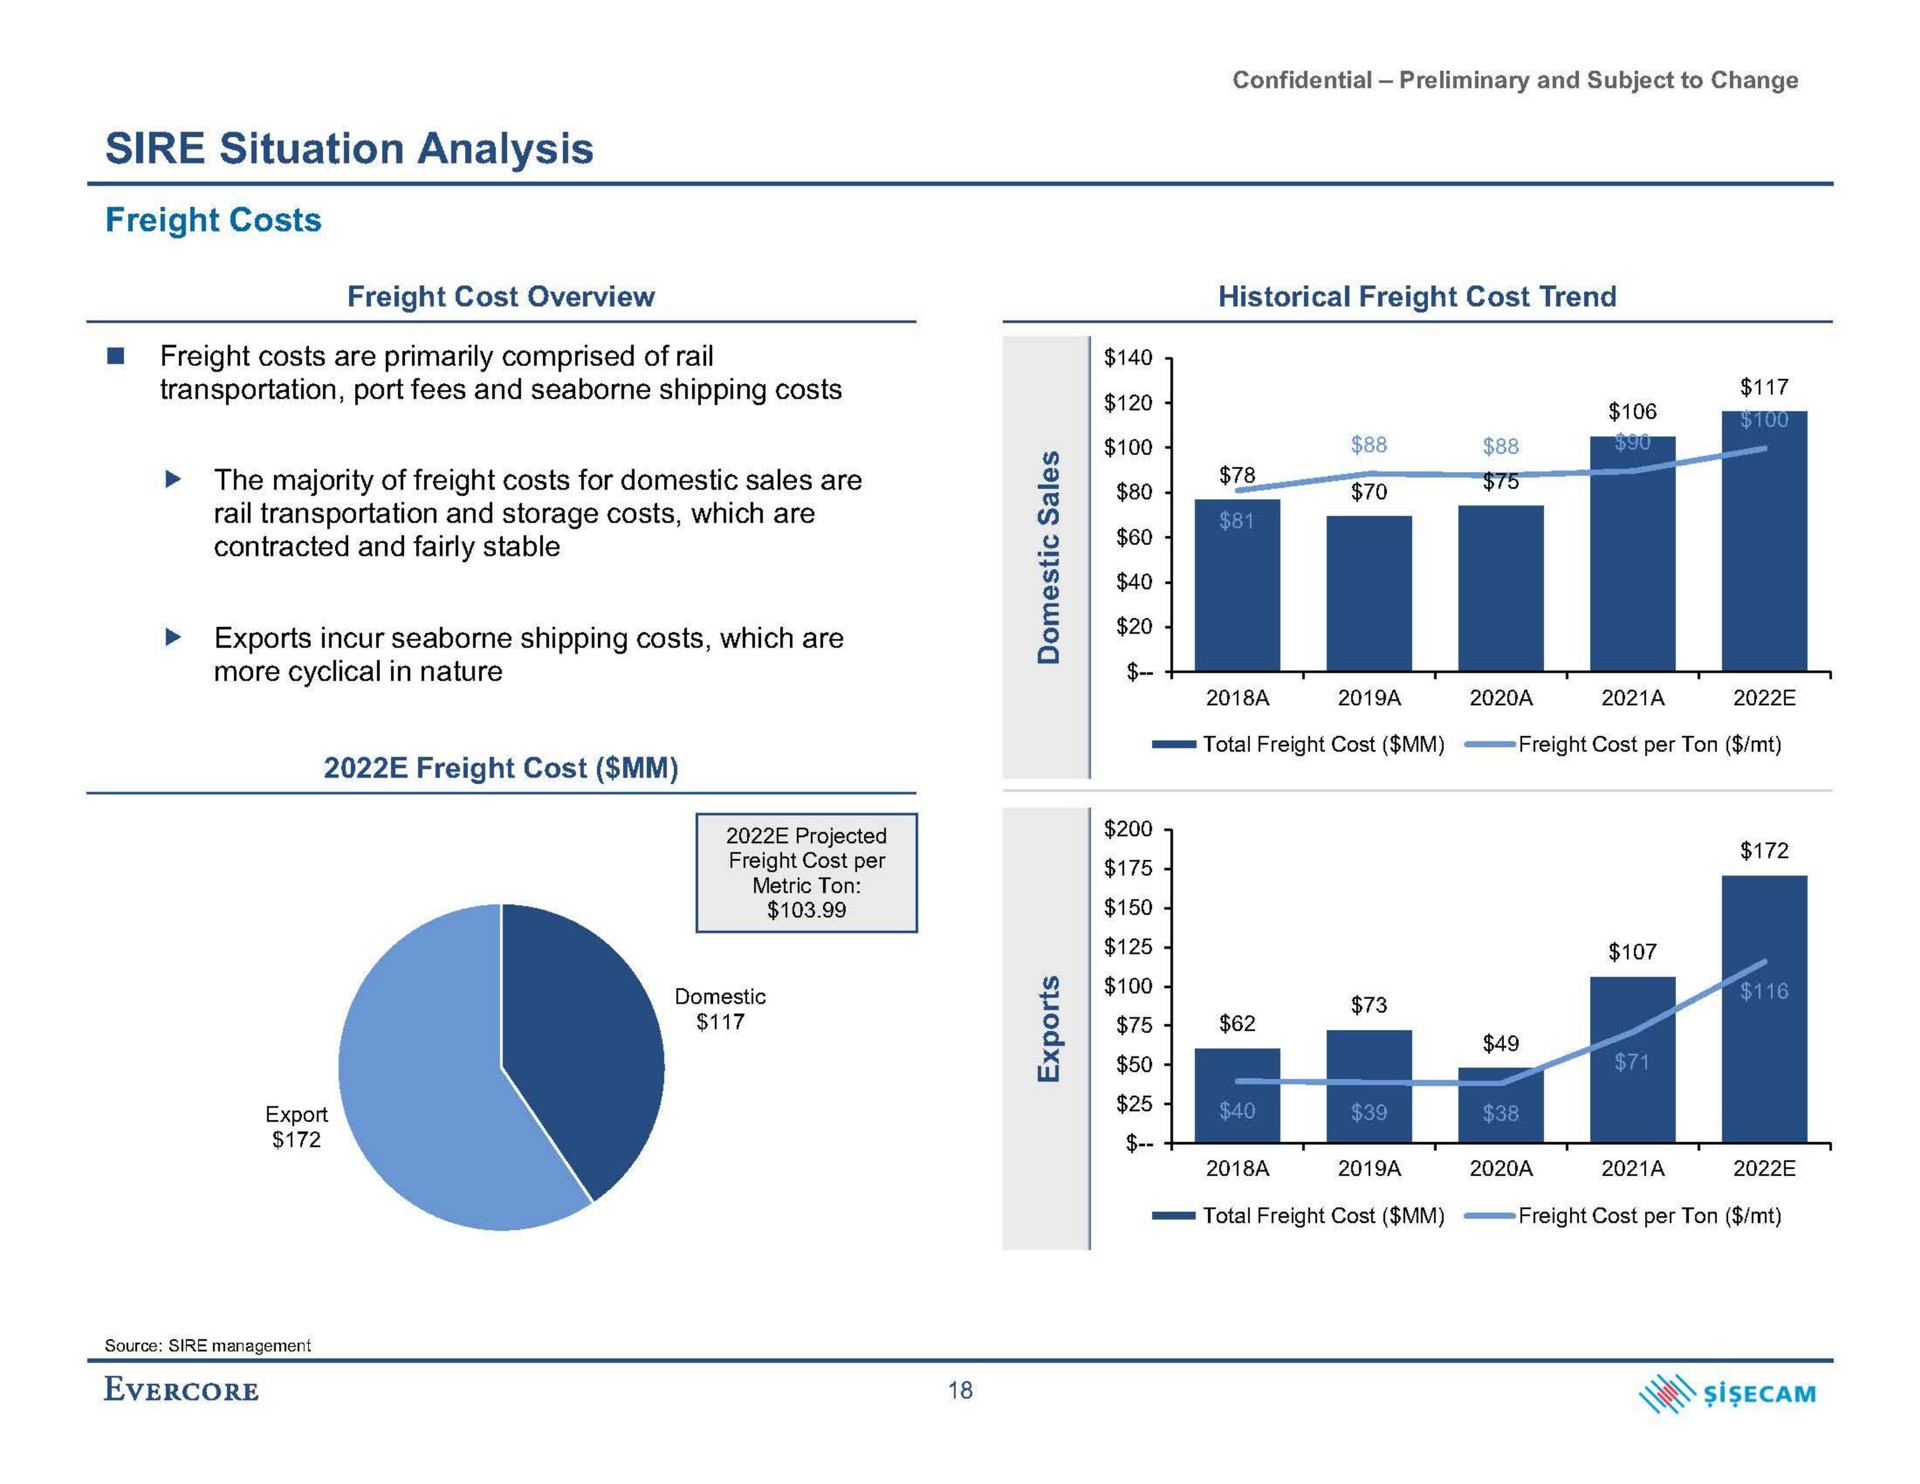 sire situation analysis freight costs freight cost | Evercore